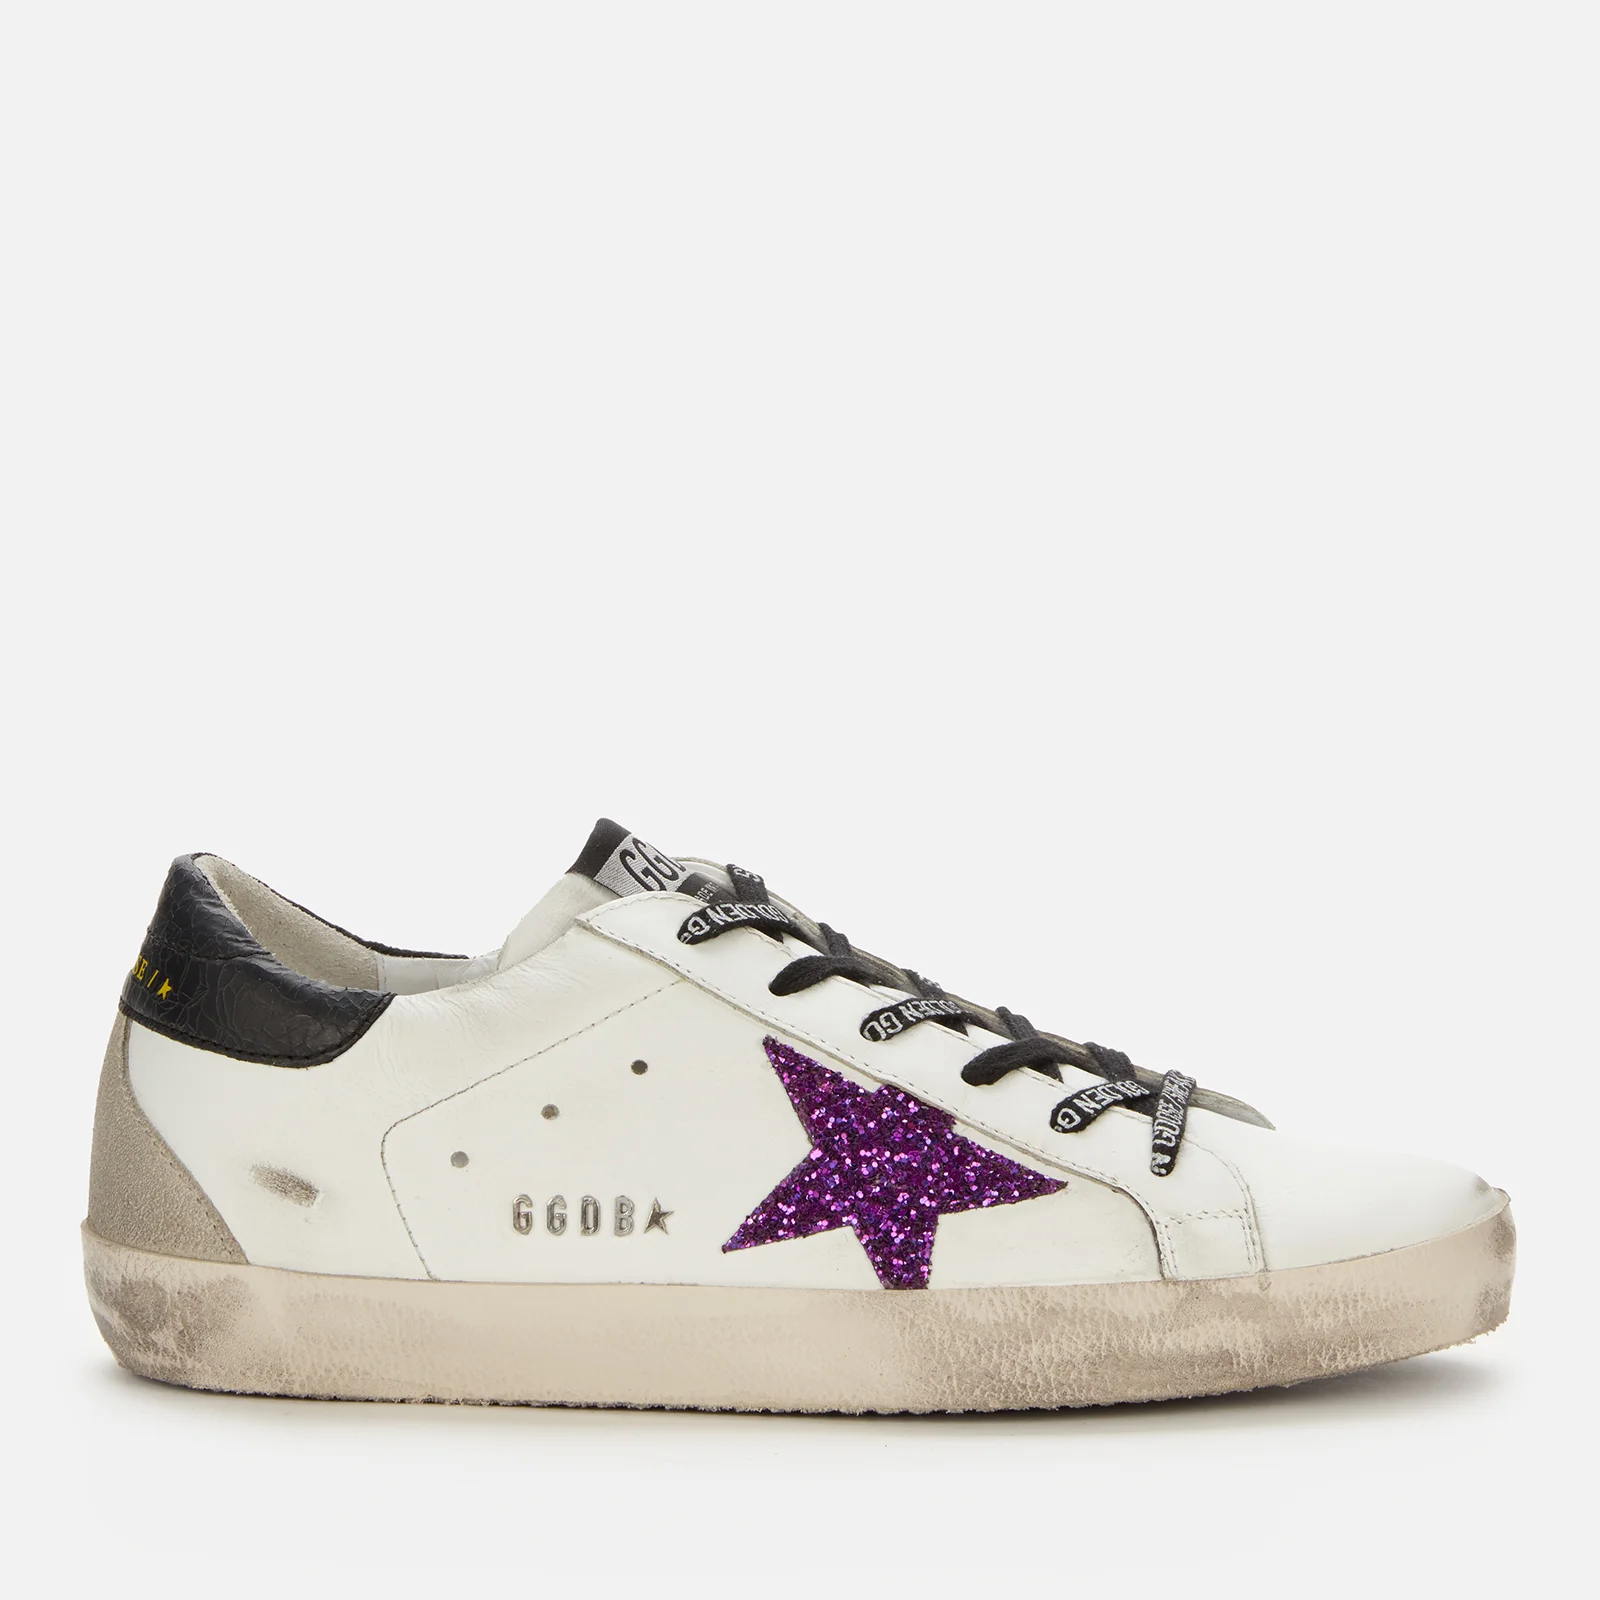 Golden Goose Women's Superstar Leather Trainers - White/Purple/Black Image 1